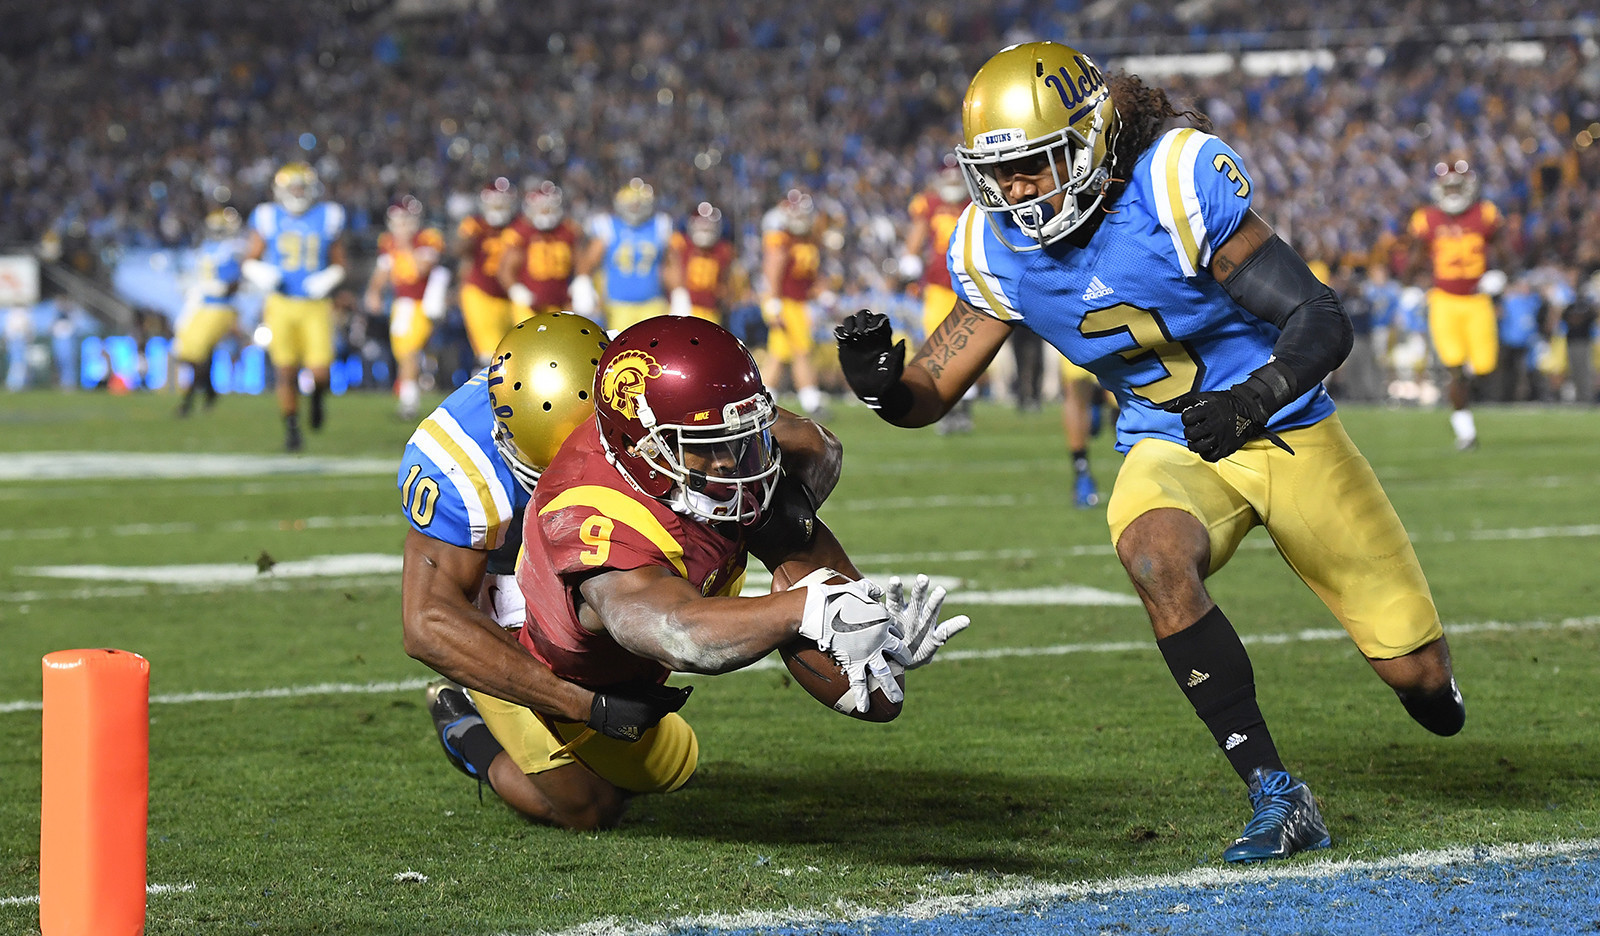 USC's win keeps Rose Bowl hopes alive, with or without a Pac-12 title